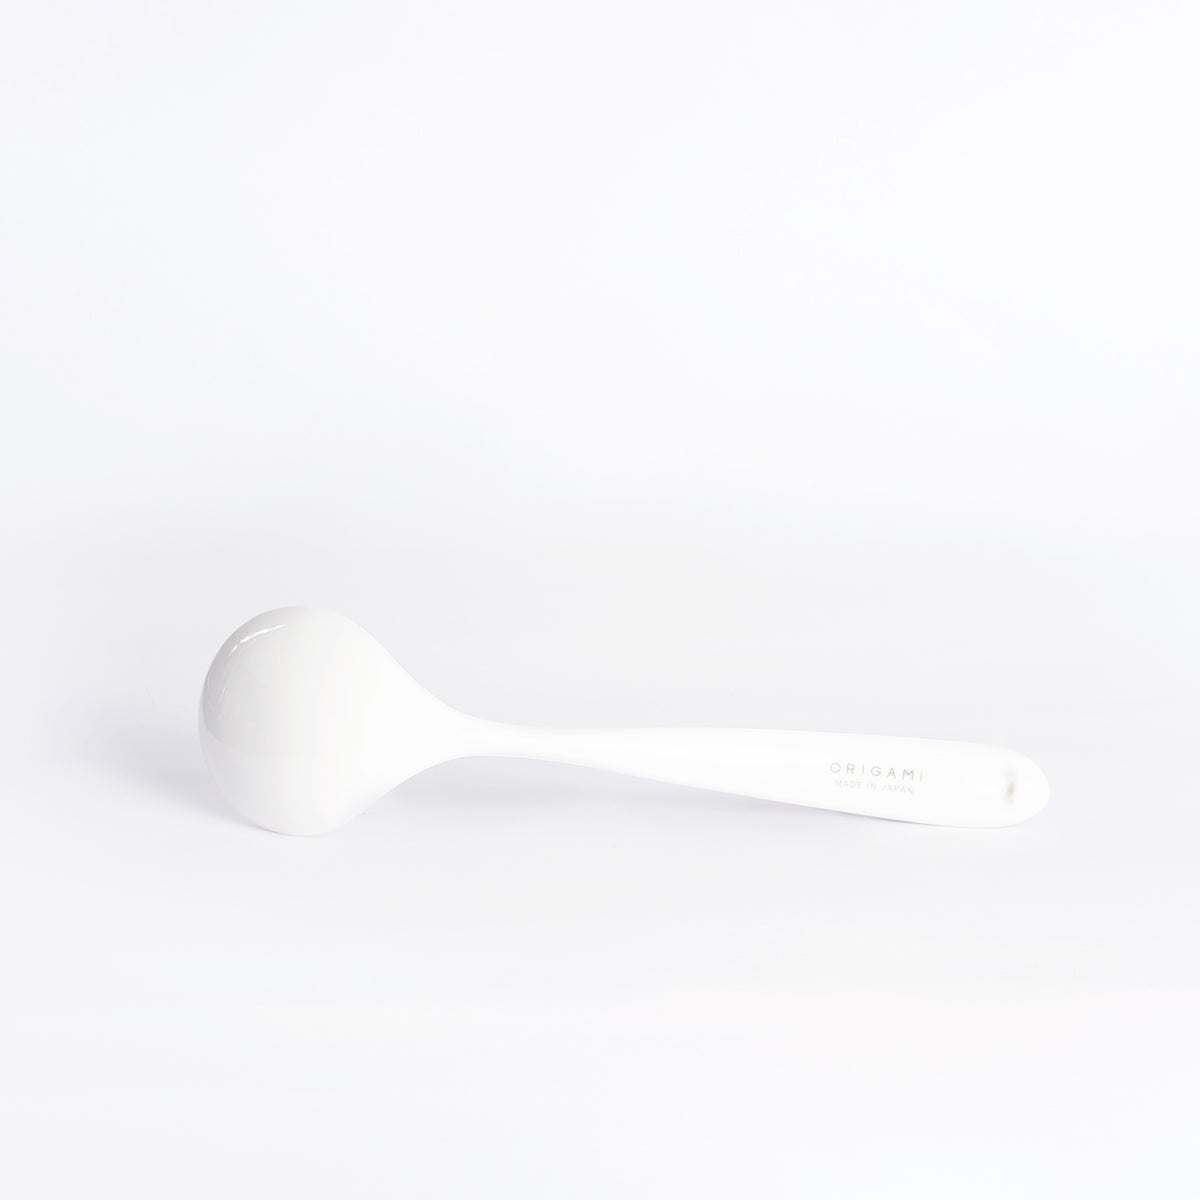 ORIGAMI Cupping Spoon